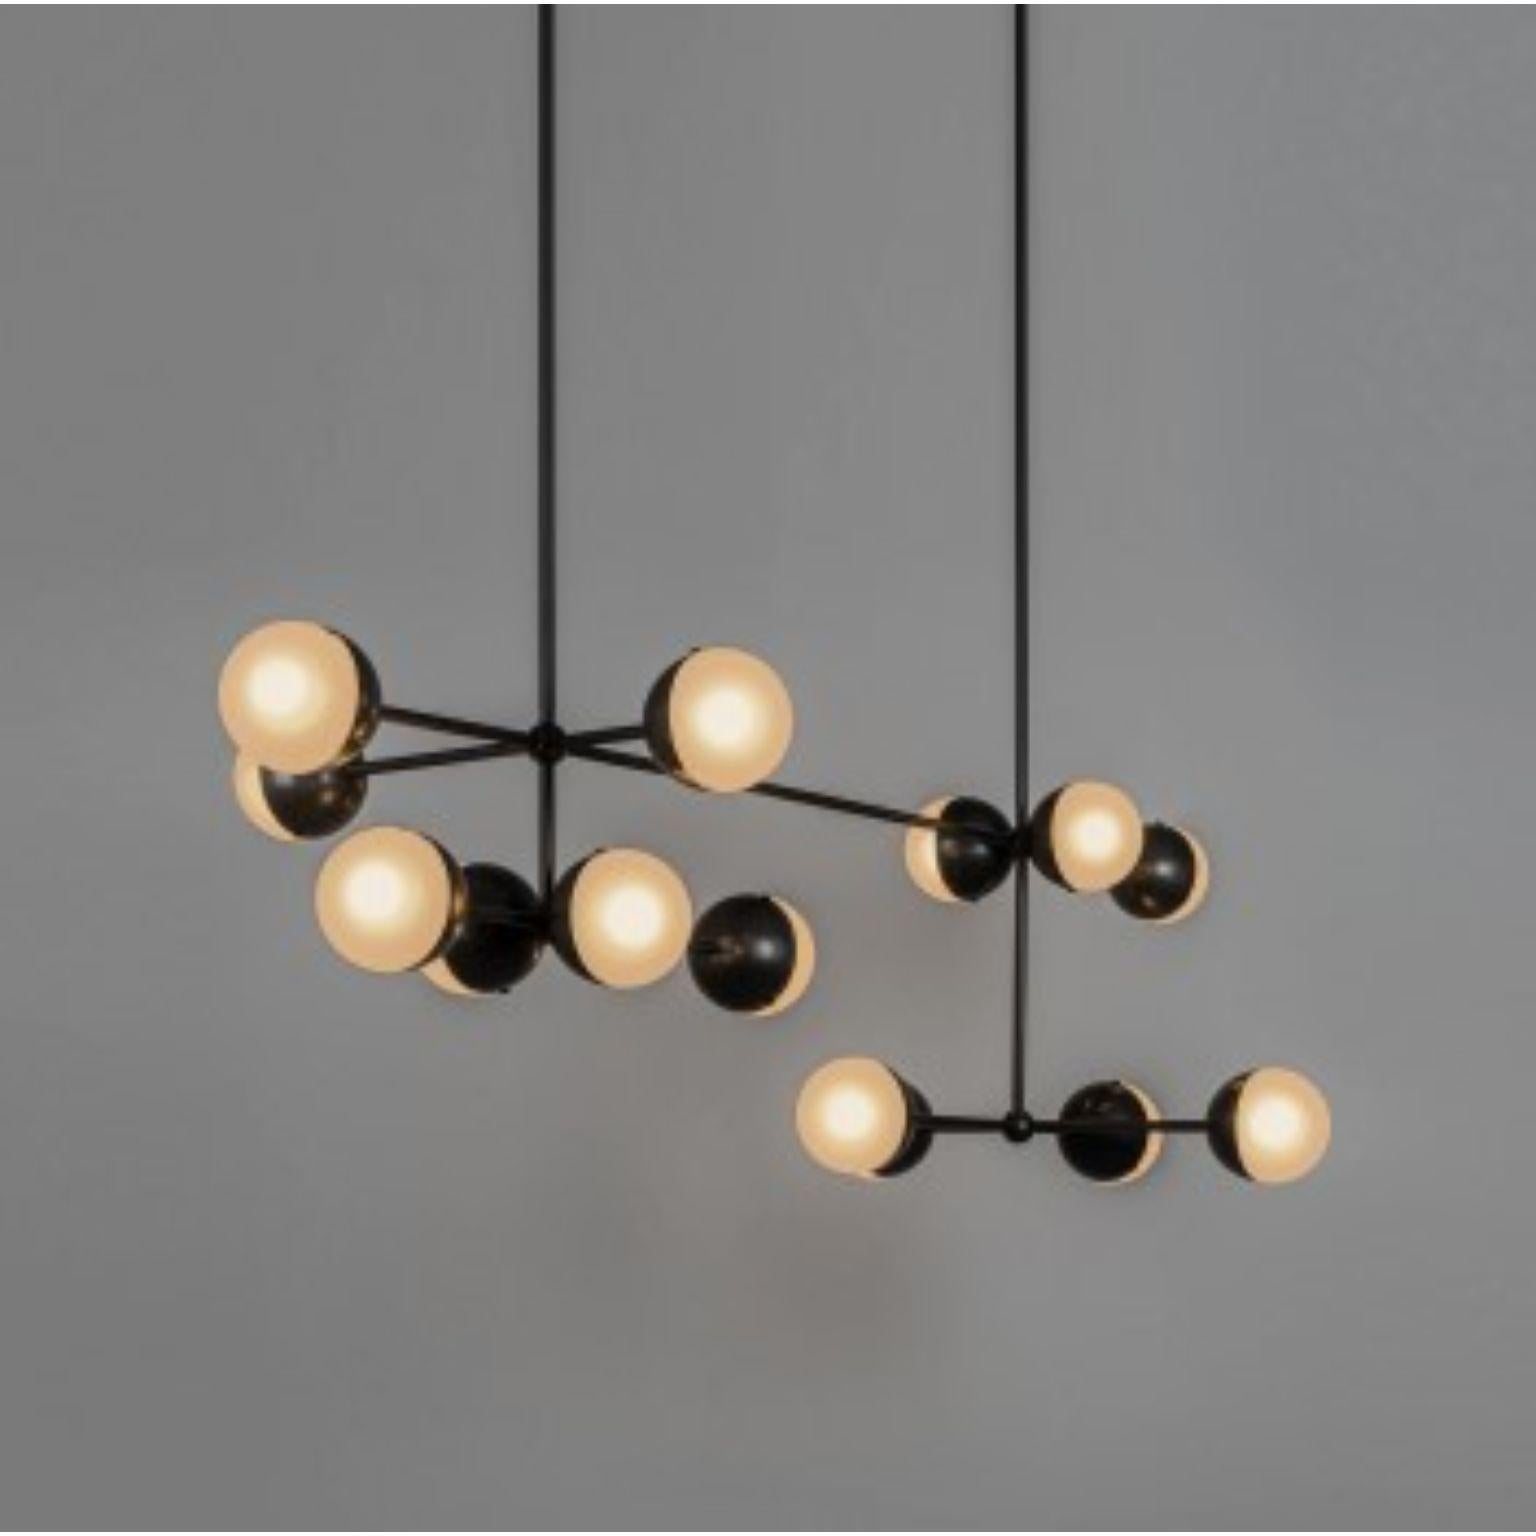 Molecule linear chandelier by Schwung
Dimensions: D 149.6 x H 183.8 cm
Materials: Brass, opal glass
Weight: 14.2 kg

Finishes available: Black gunmetal, polished nickel, brass
Other sizes available.

 Schwung is a german word, and loosely